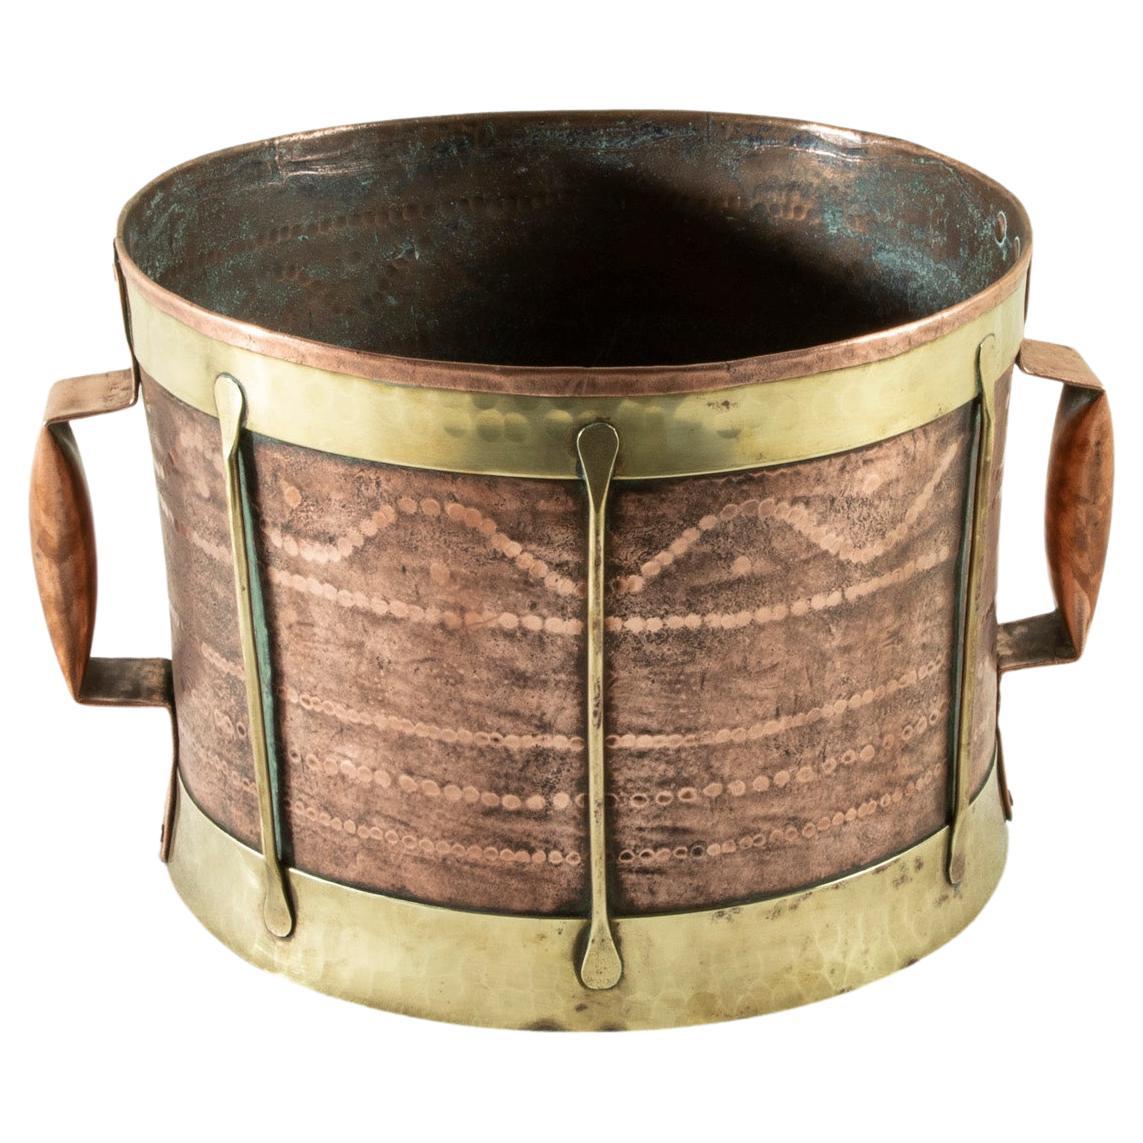 Late 19th Century French Hand Hammered Copper and Brass Grain Measure Cachepot